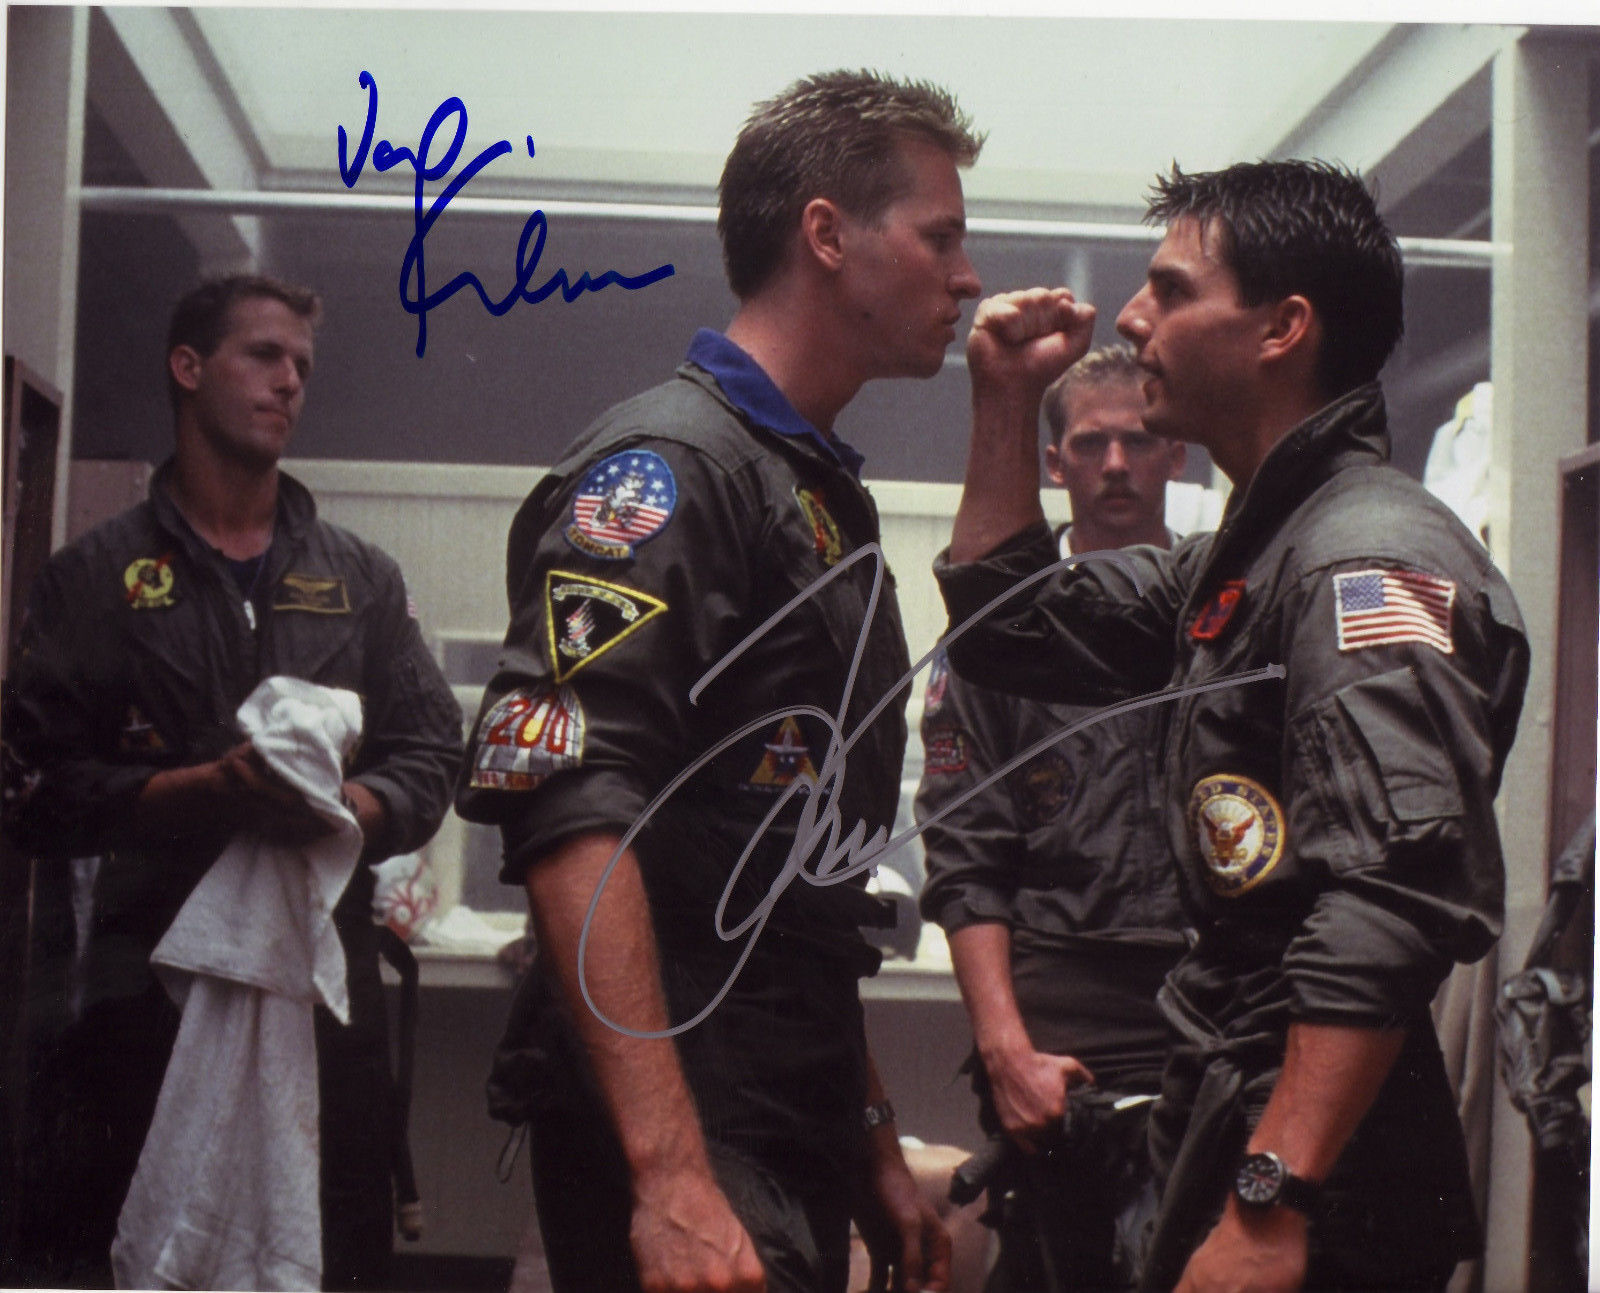 TOP GUN - TOM CRUISE & VAL KILMER AUTOGRAPH SIGNED PP Photo Poster painting POSTER